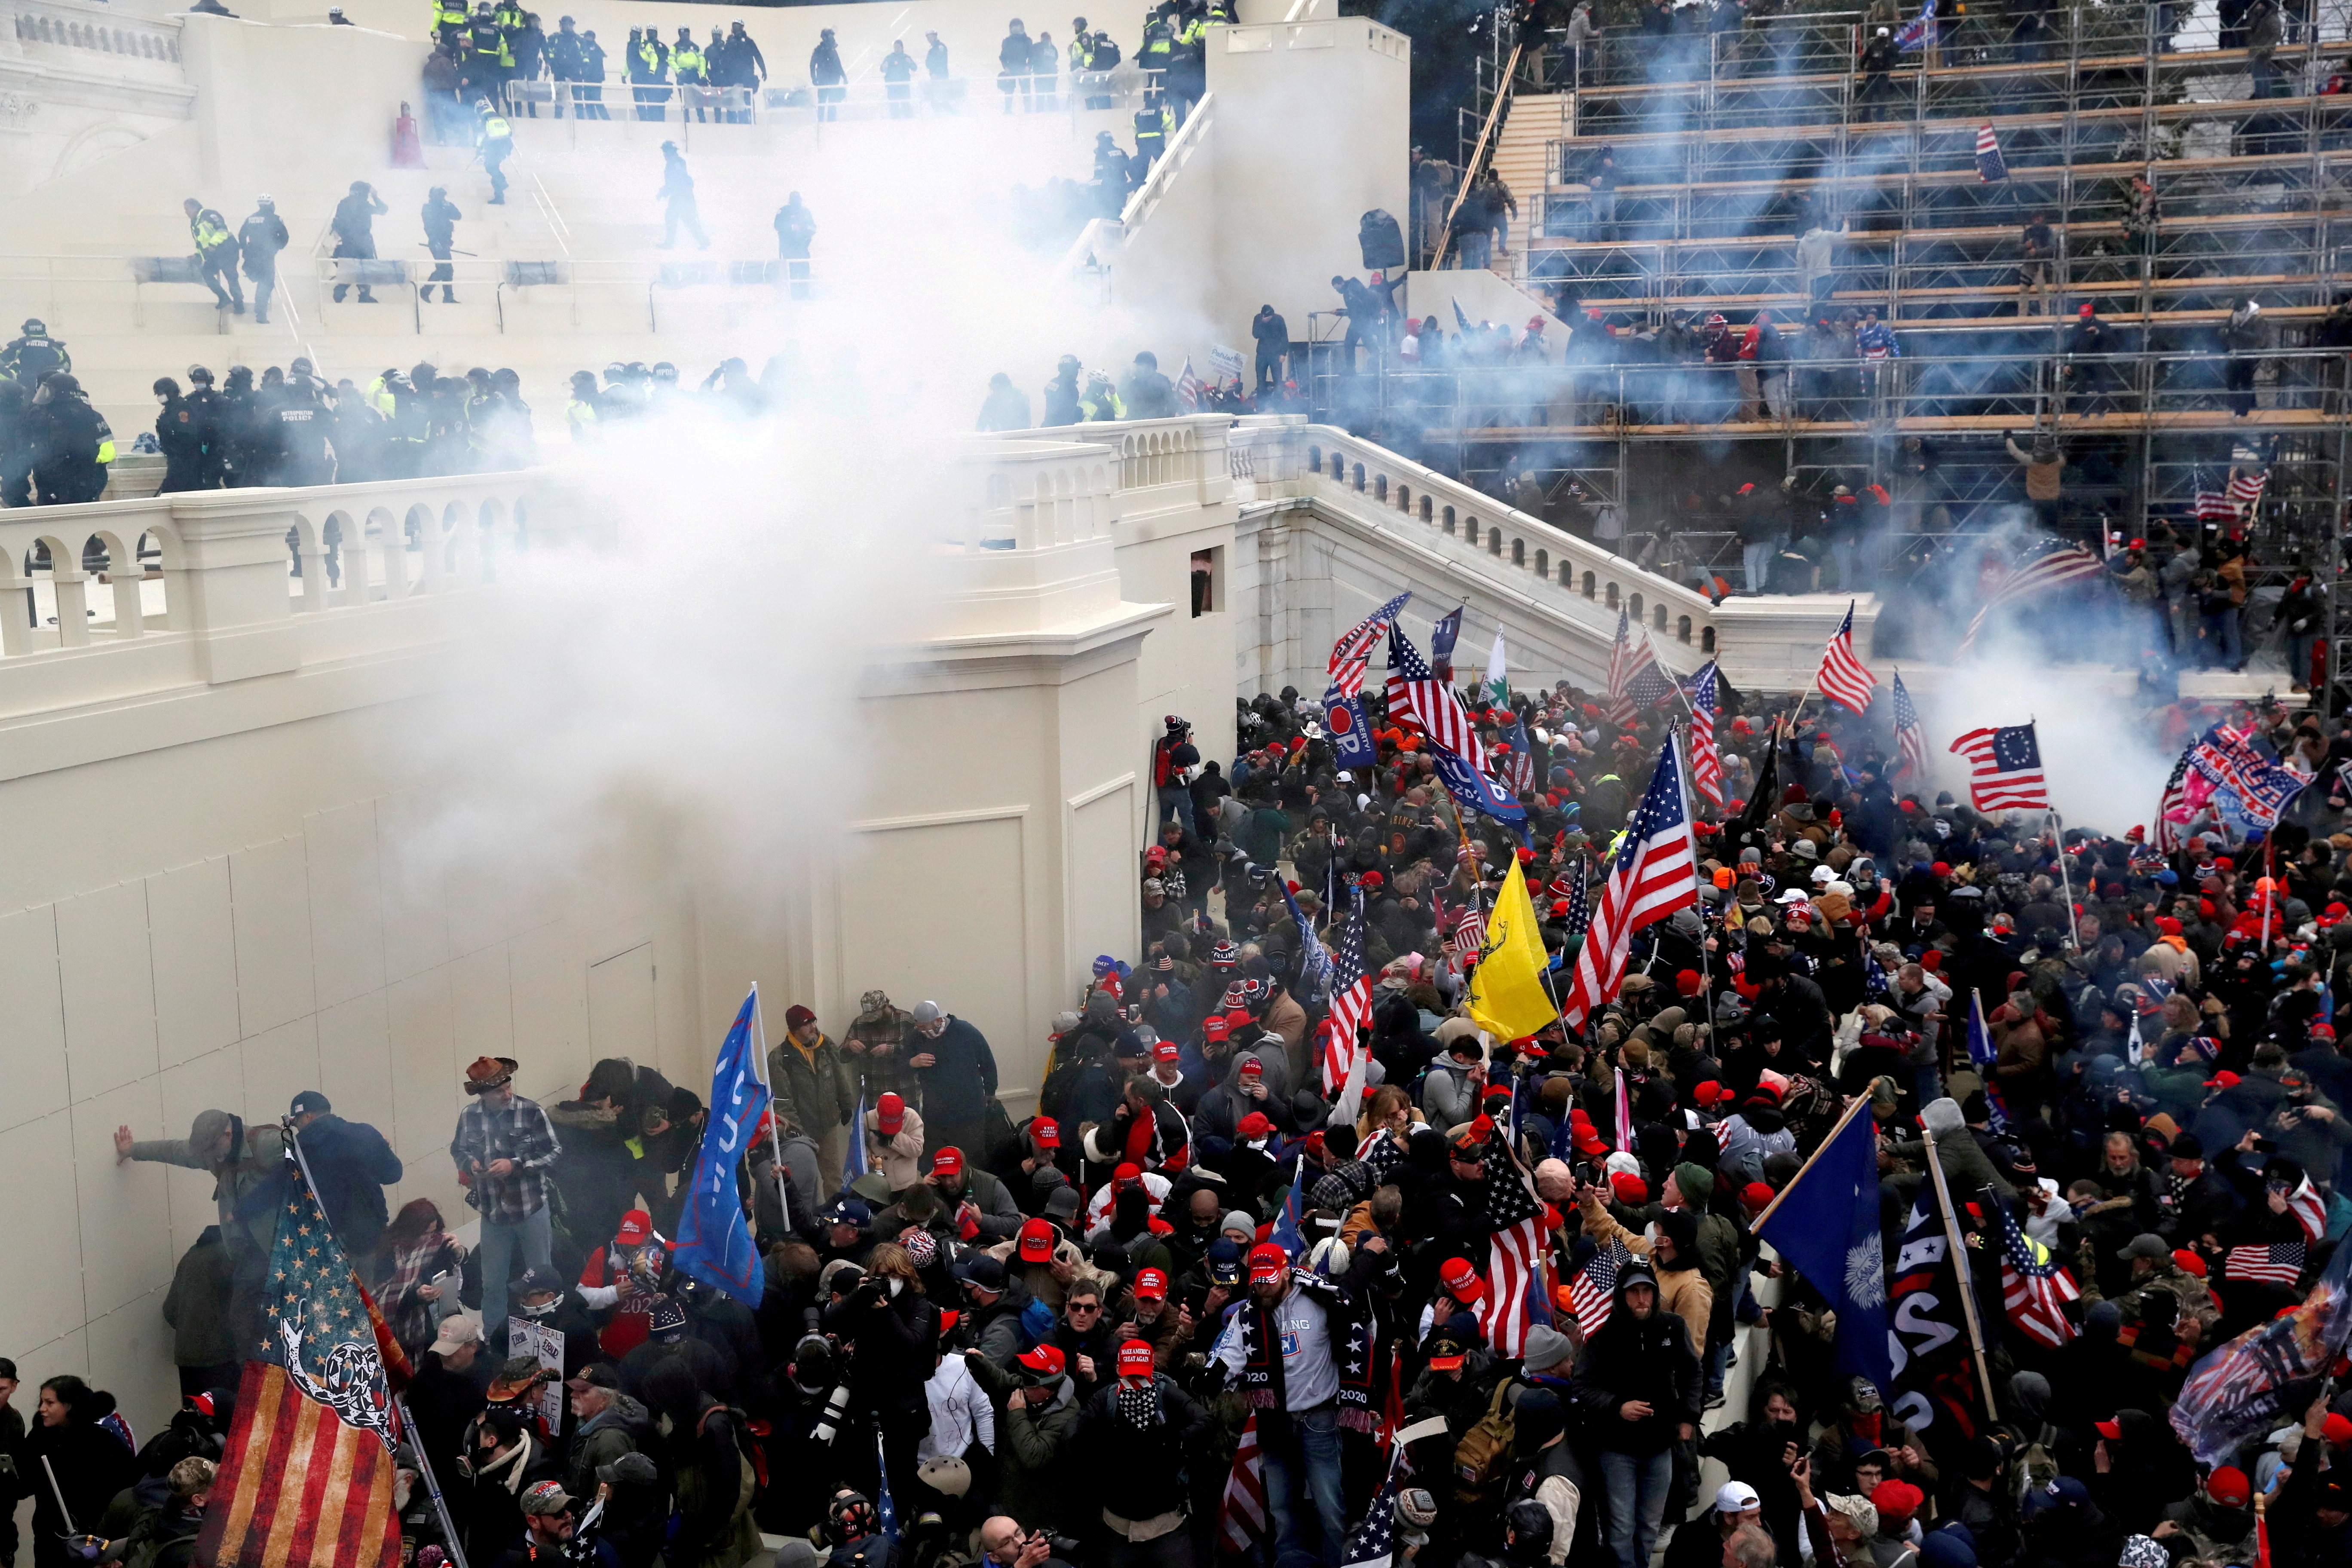 Police release tear gas into a crowd of pro-Trump protesters during clashes at a rally to contest the certification of the 2020 U.S. presidential election results by the U.S. Congress, at the U.S. Capitol Building in Washington, U.S, January 6, 2021. REUTERS/Shannon Stapleton/File Photo